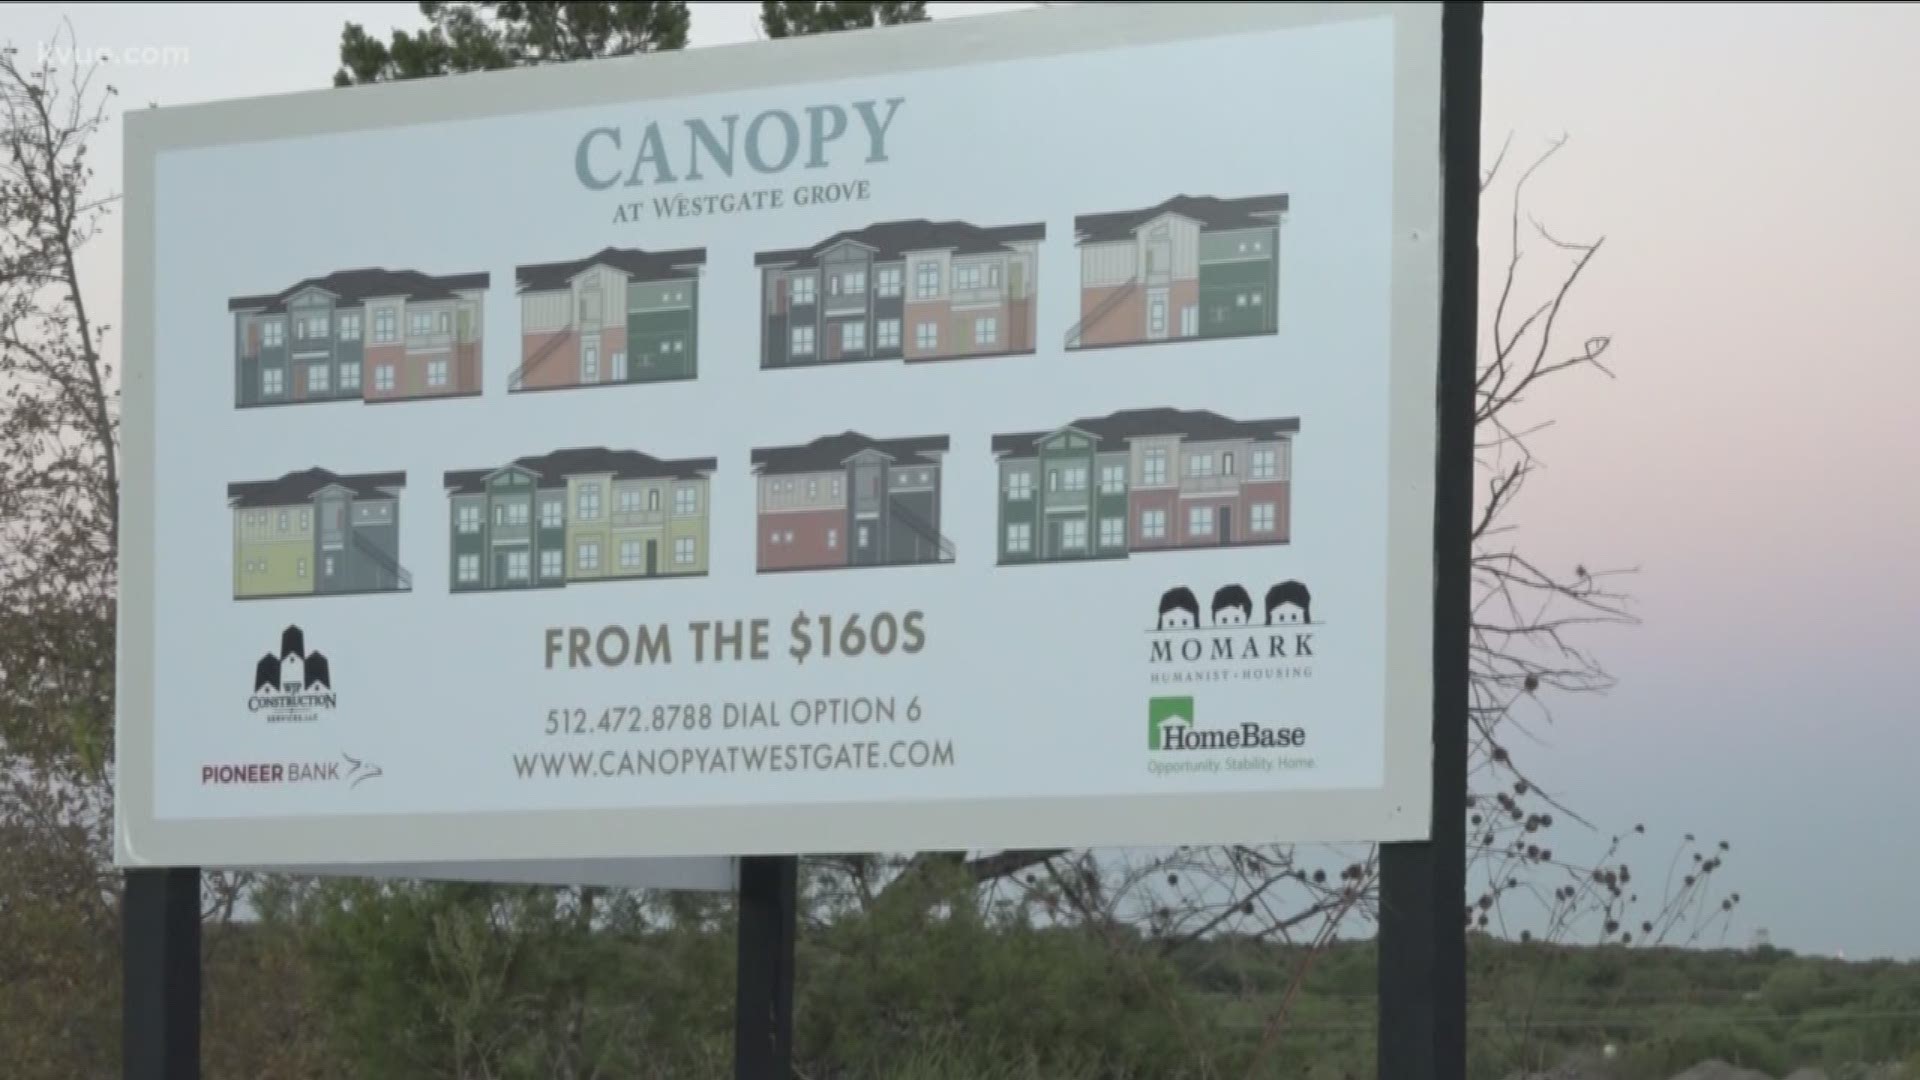 A developer plans to build 88 affordable condos in South Austin, in partnership with the City.